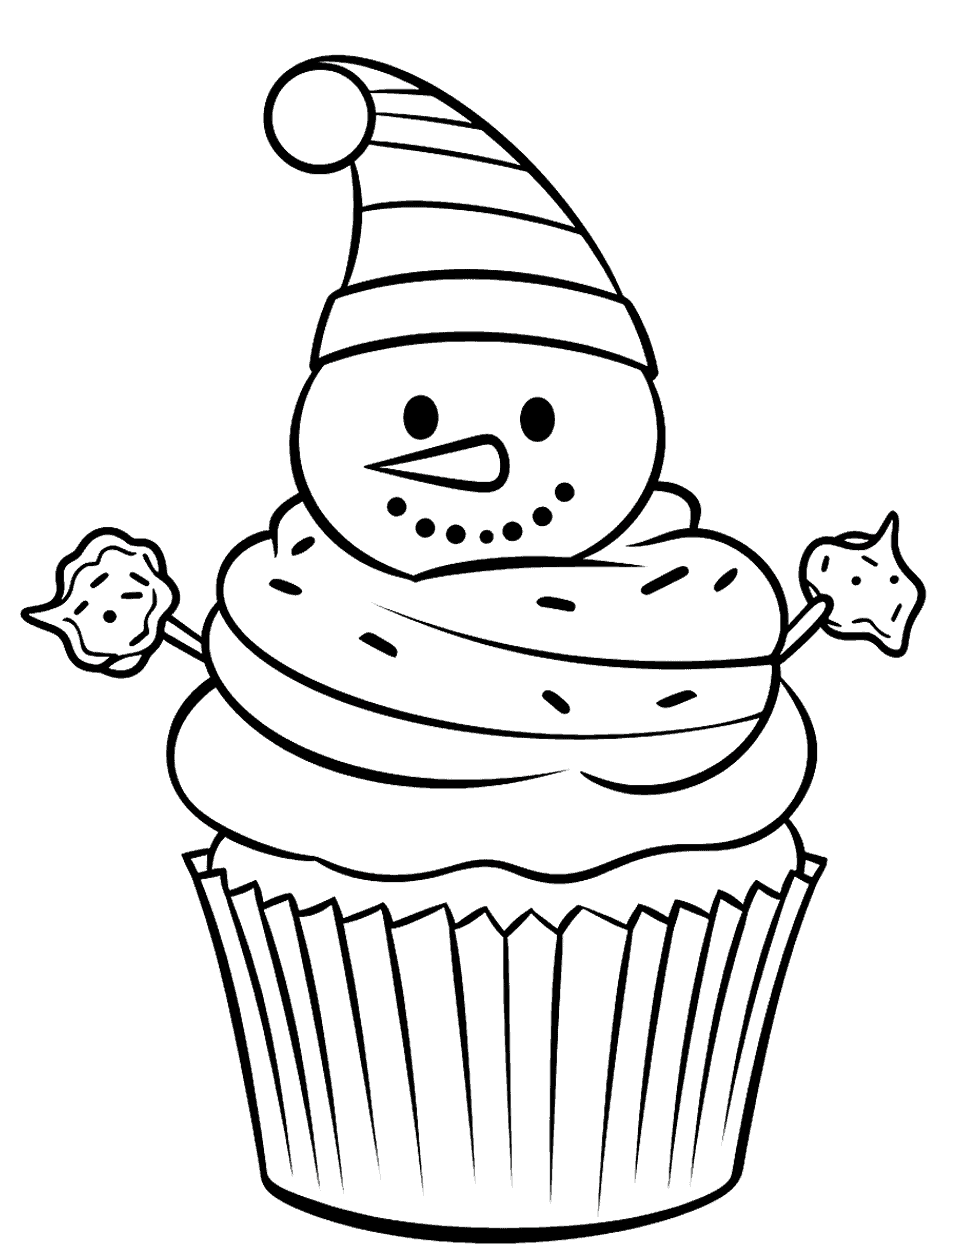 Cupcake and a Snowman Coloring Page - A cupcake desinged like a snowman.